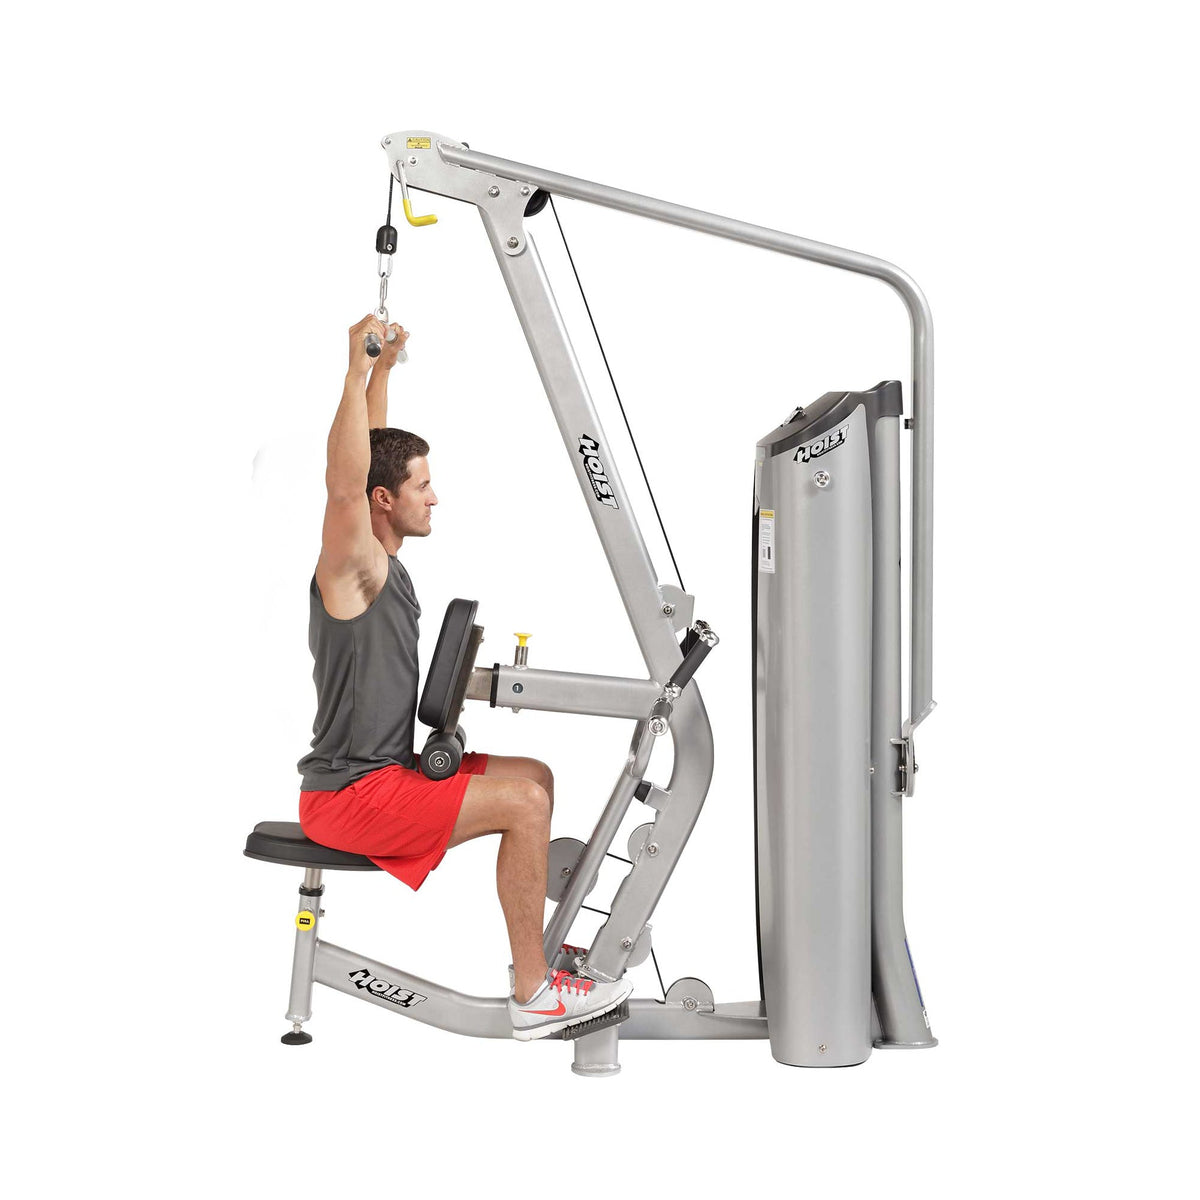 Hoist Fitness HD-3200 Lat Pulldown/Mid Row view of lat pulldown exercise | Fitness Experience